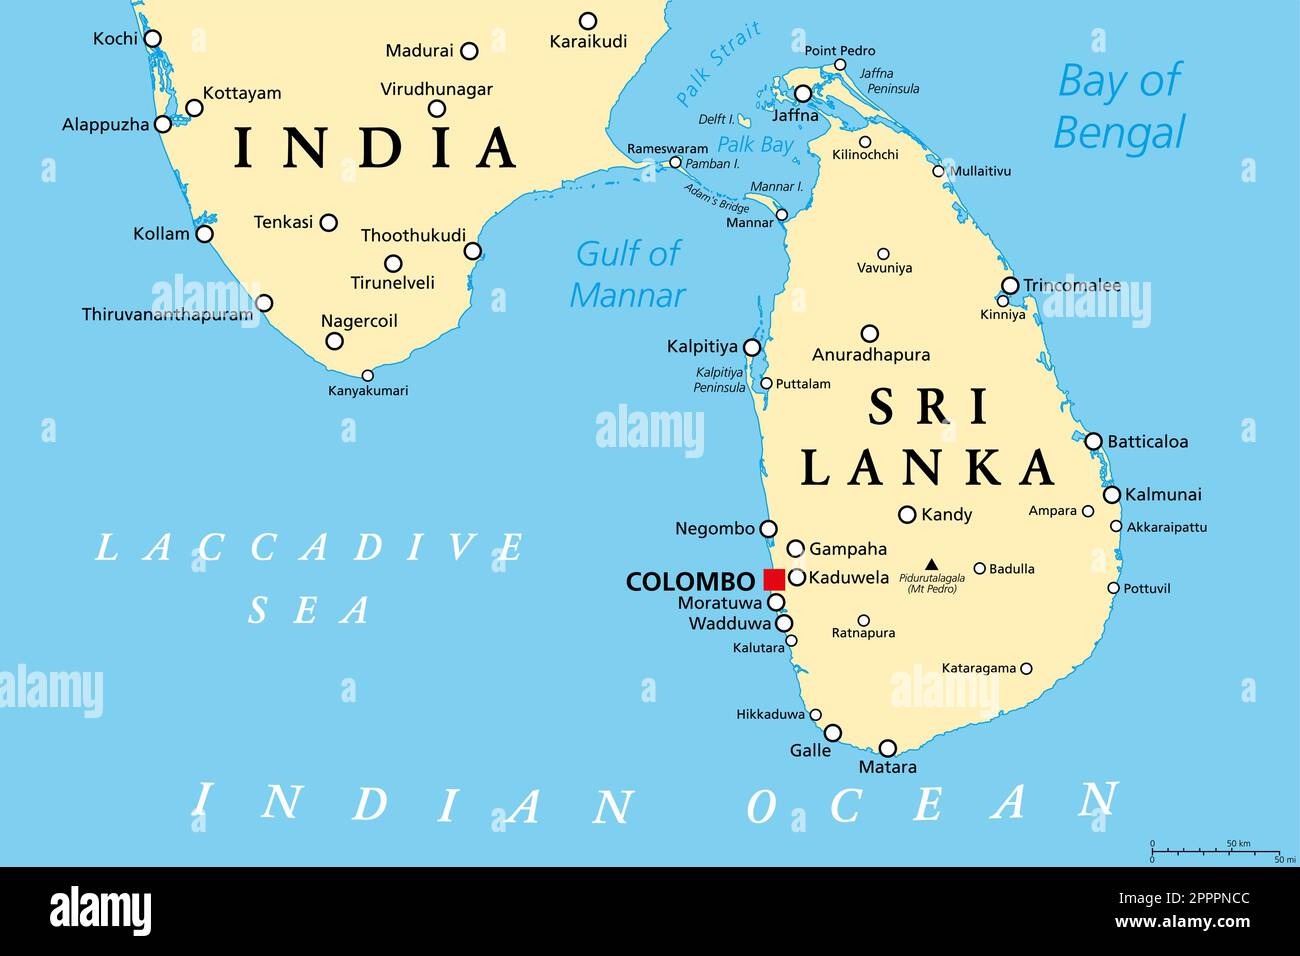 Sri Lanka and part of Southern India, political map Stock Vector